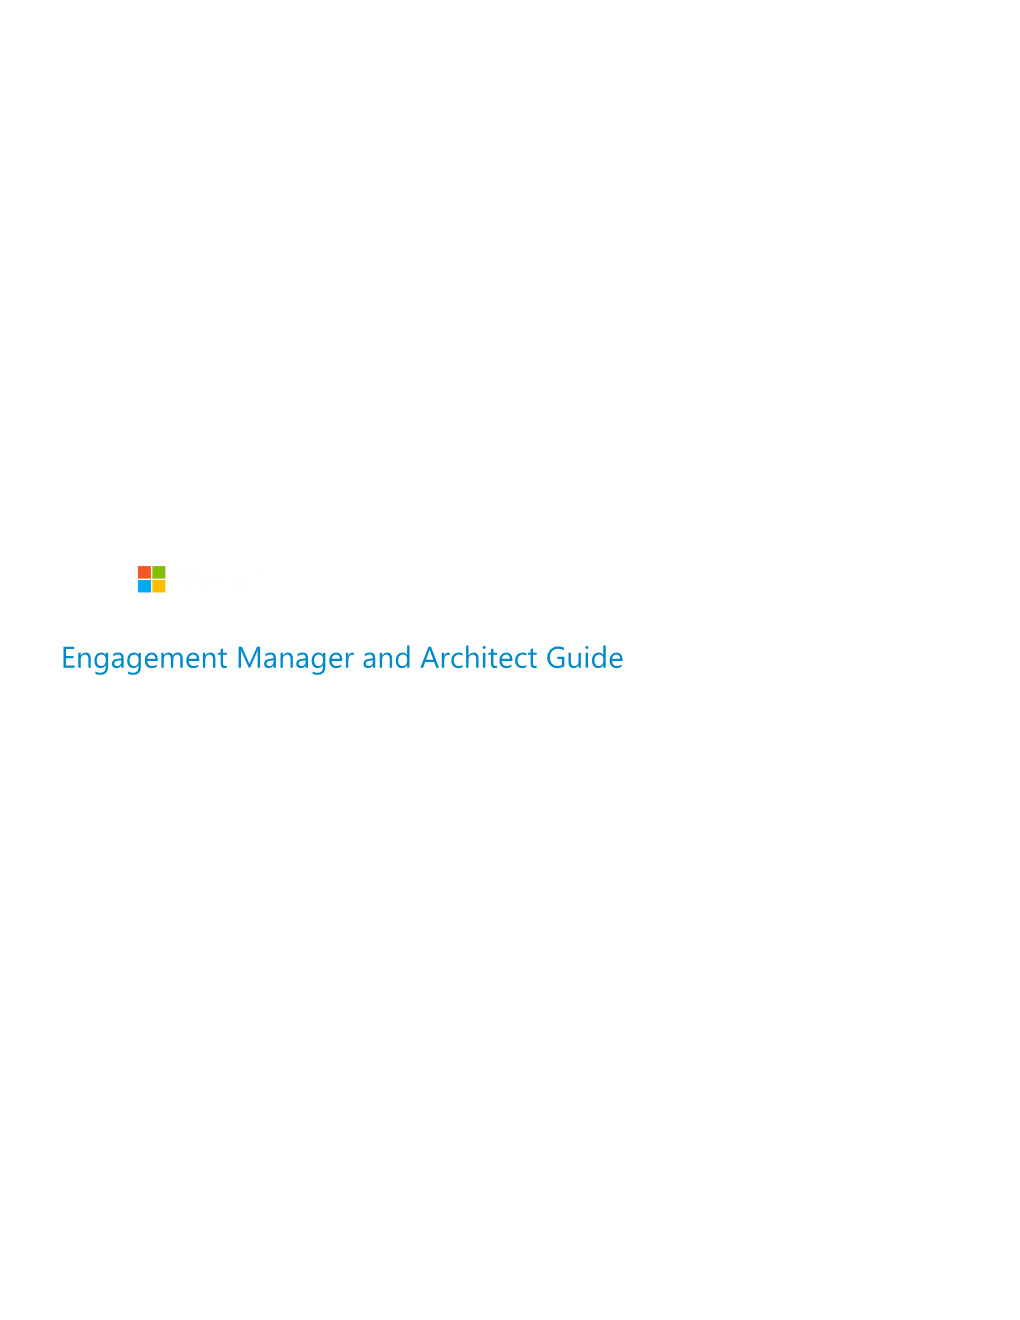 Engagement Manager and Architect Guide